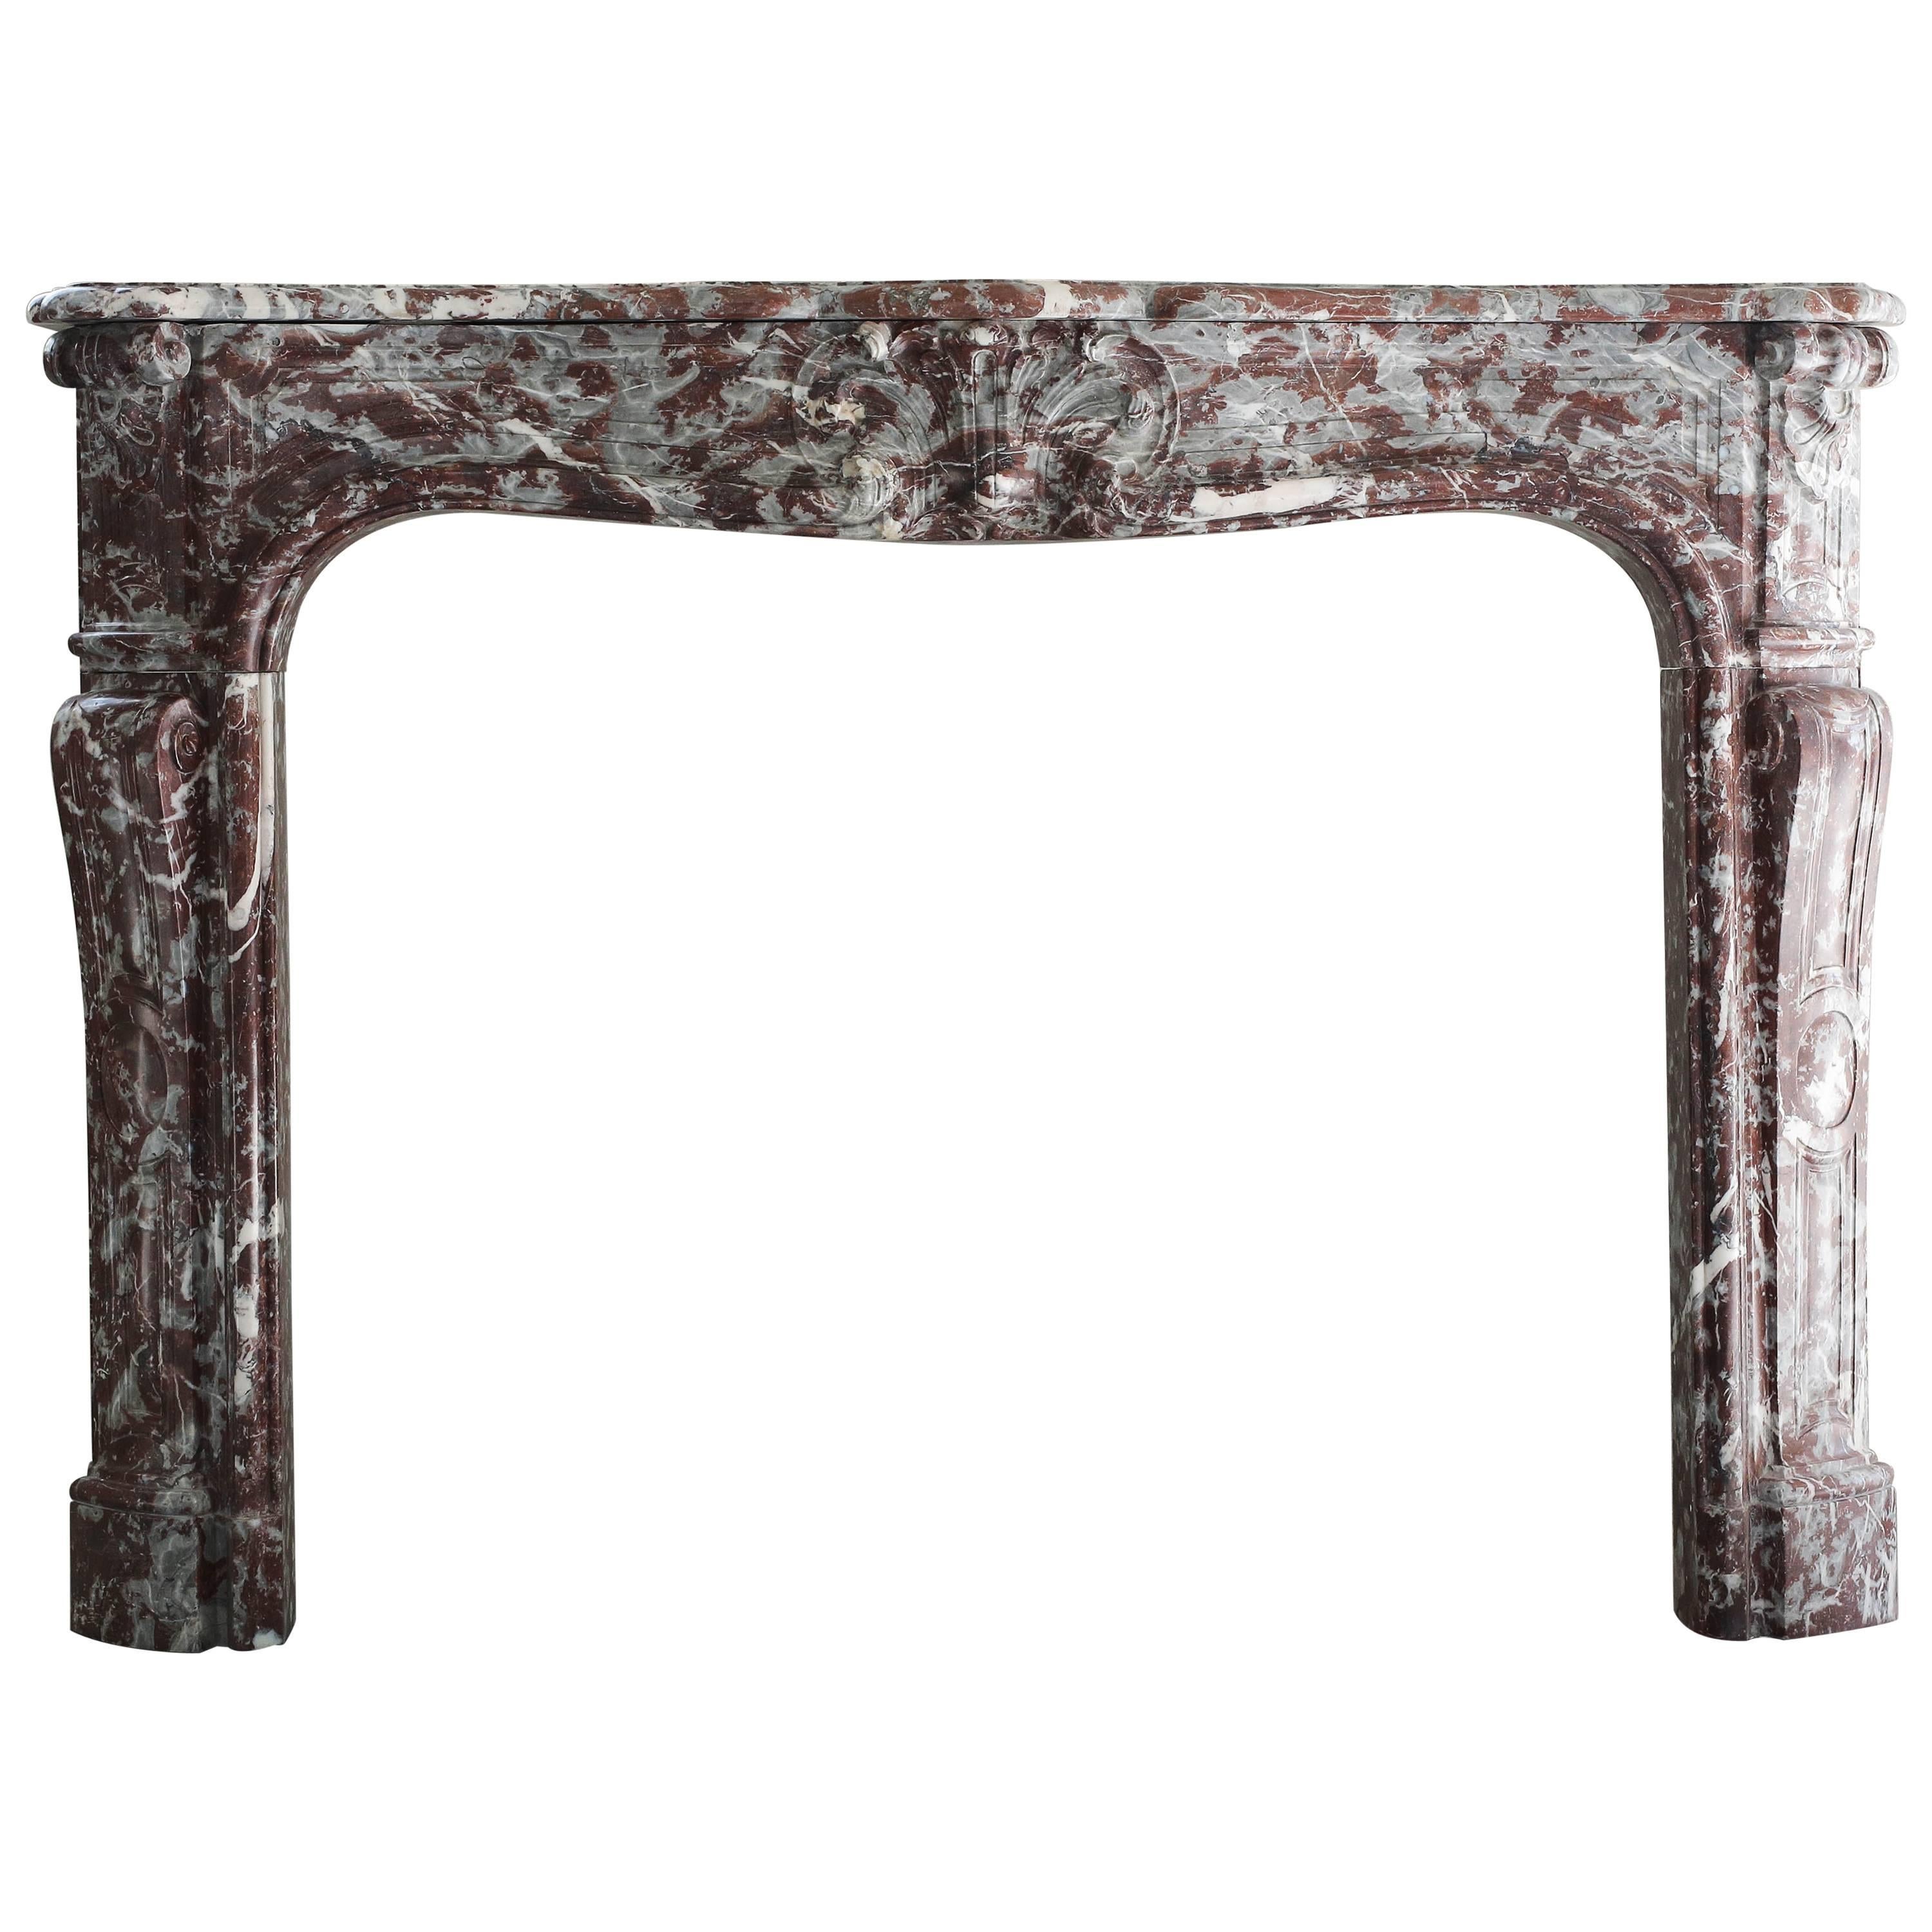 Antique Marble Fireplace, 19th century, Louis XV